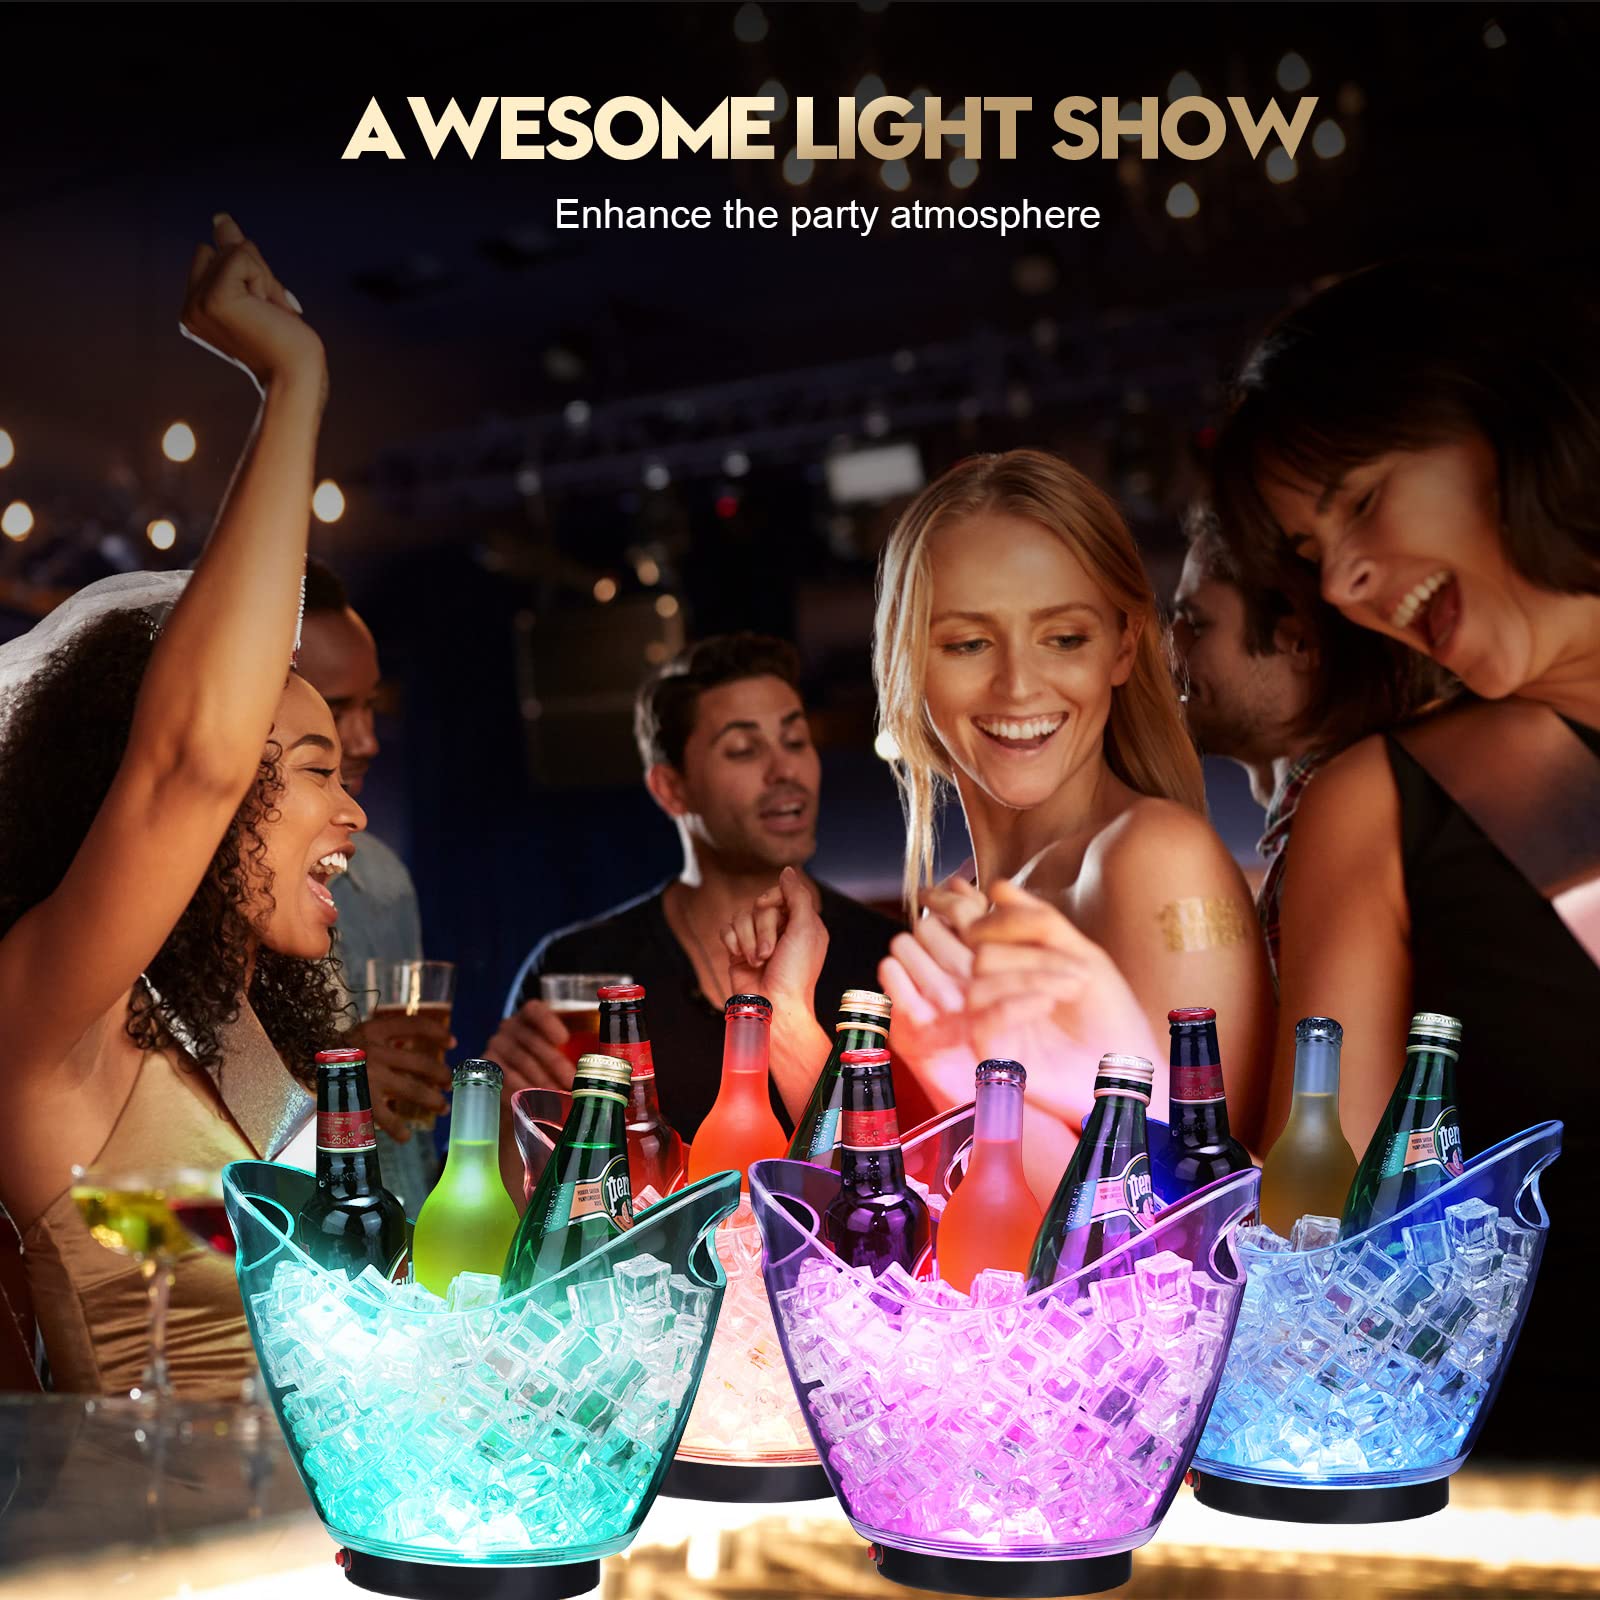 6 Pcs LED Ice Bucket Bulk with Scoop and Tongs 4L LED Light Ice Bucket 7 Color Changing Ice Bucket Clear Acrylic Champagne Beer Wine Beverage Cooler Bucket for Party Bar Club KTV Restaurant Home